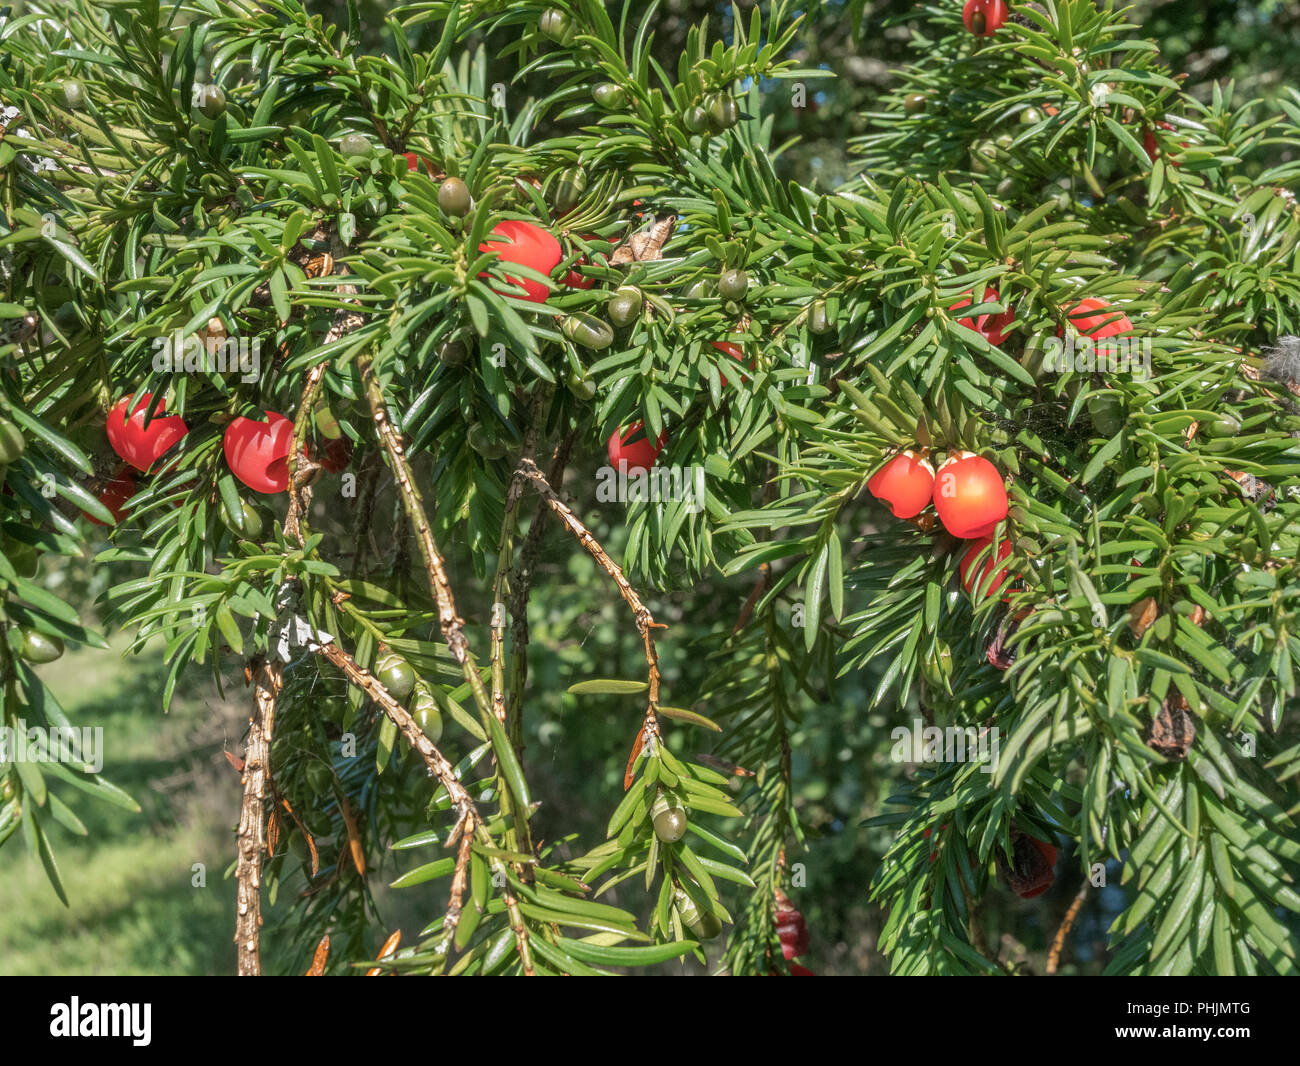 Foliage and red poisonous berries of a Yew / Taxus baccata tree in sunshine. Deadly plants of Britain. Stock Photo